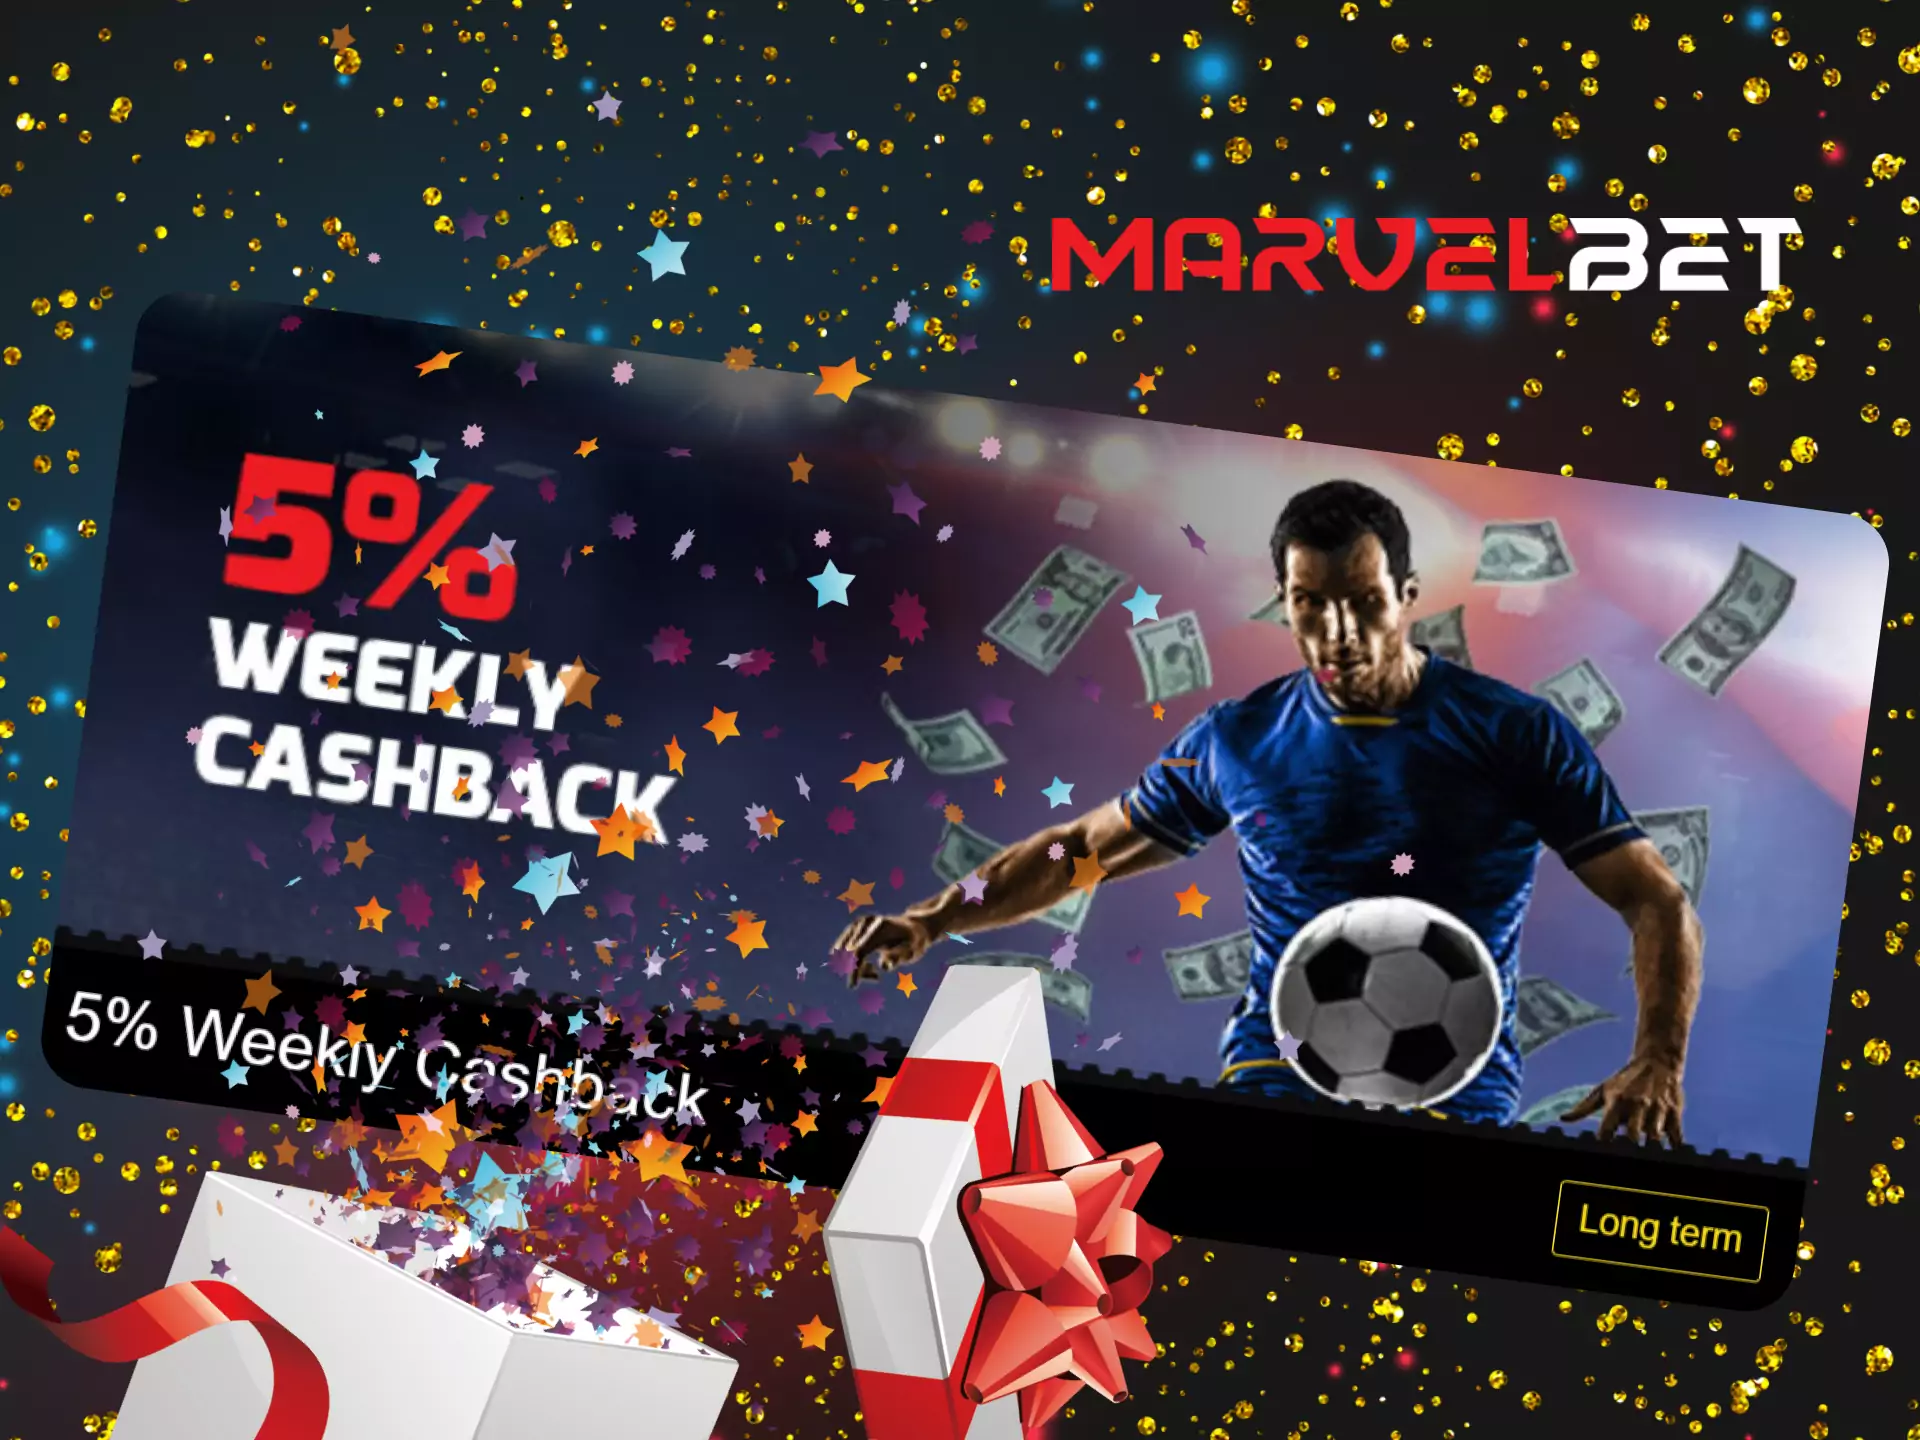 At MarvelBet you can always get a special sports betting bonus with cashback every week.